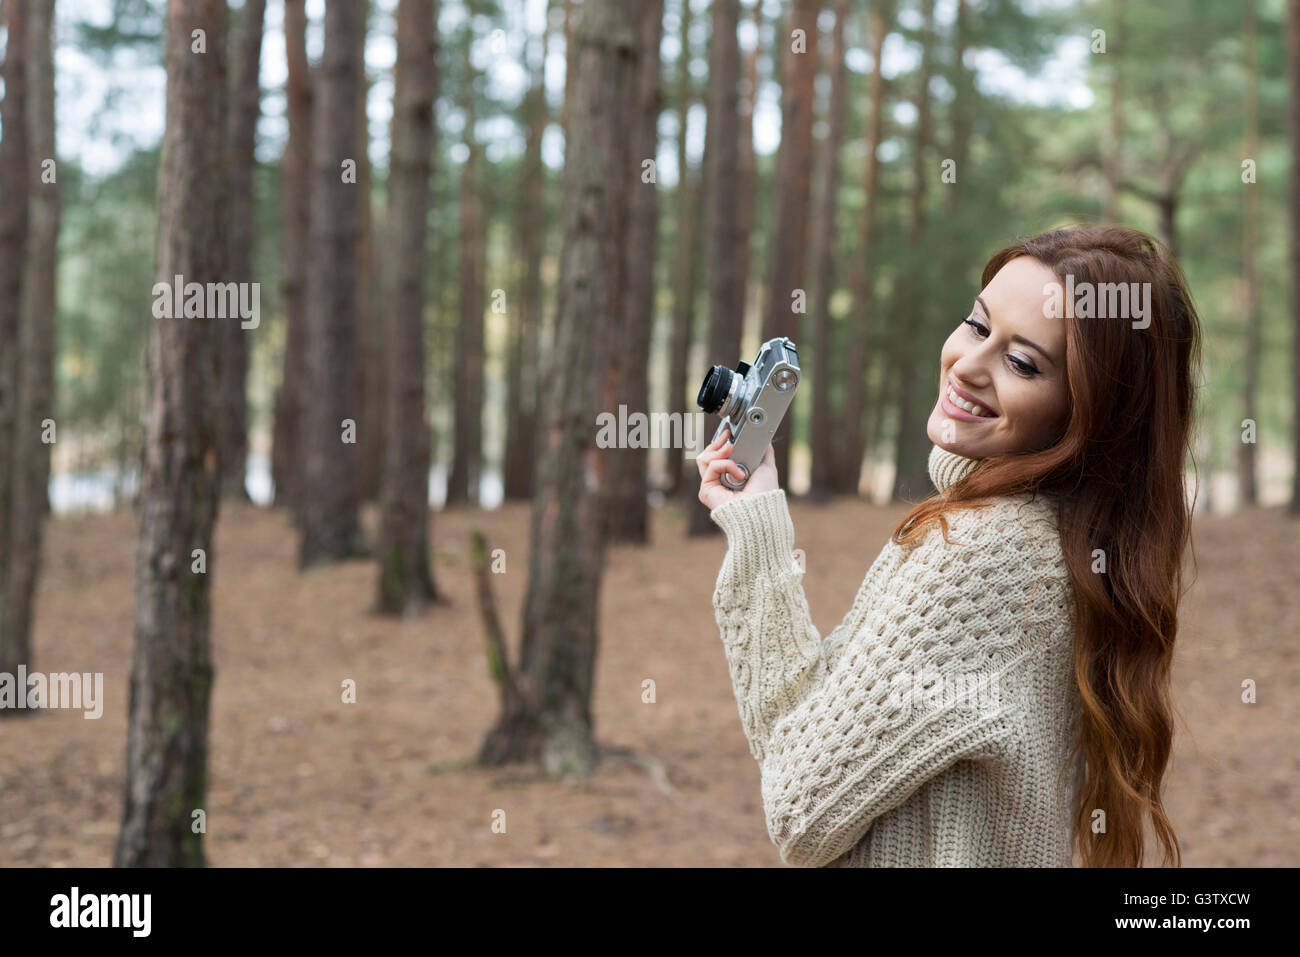 A young woman using a vintage camera in a forest in Autumn. Stock Photo